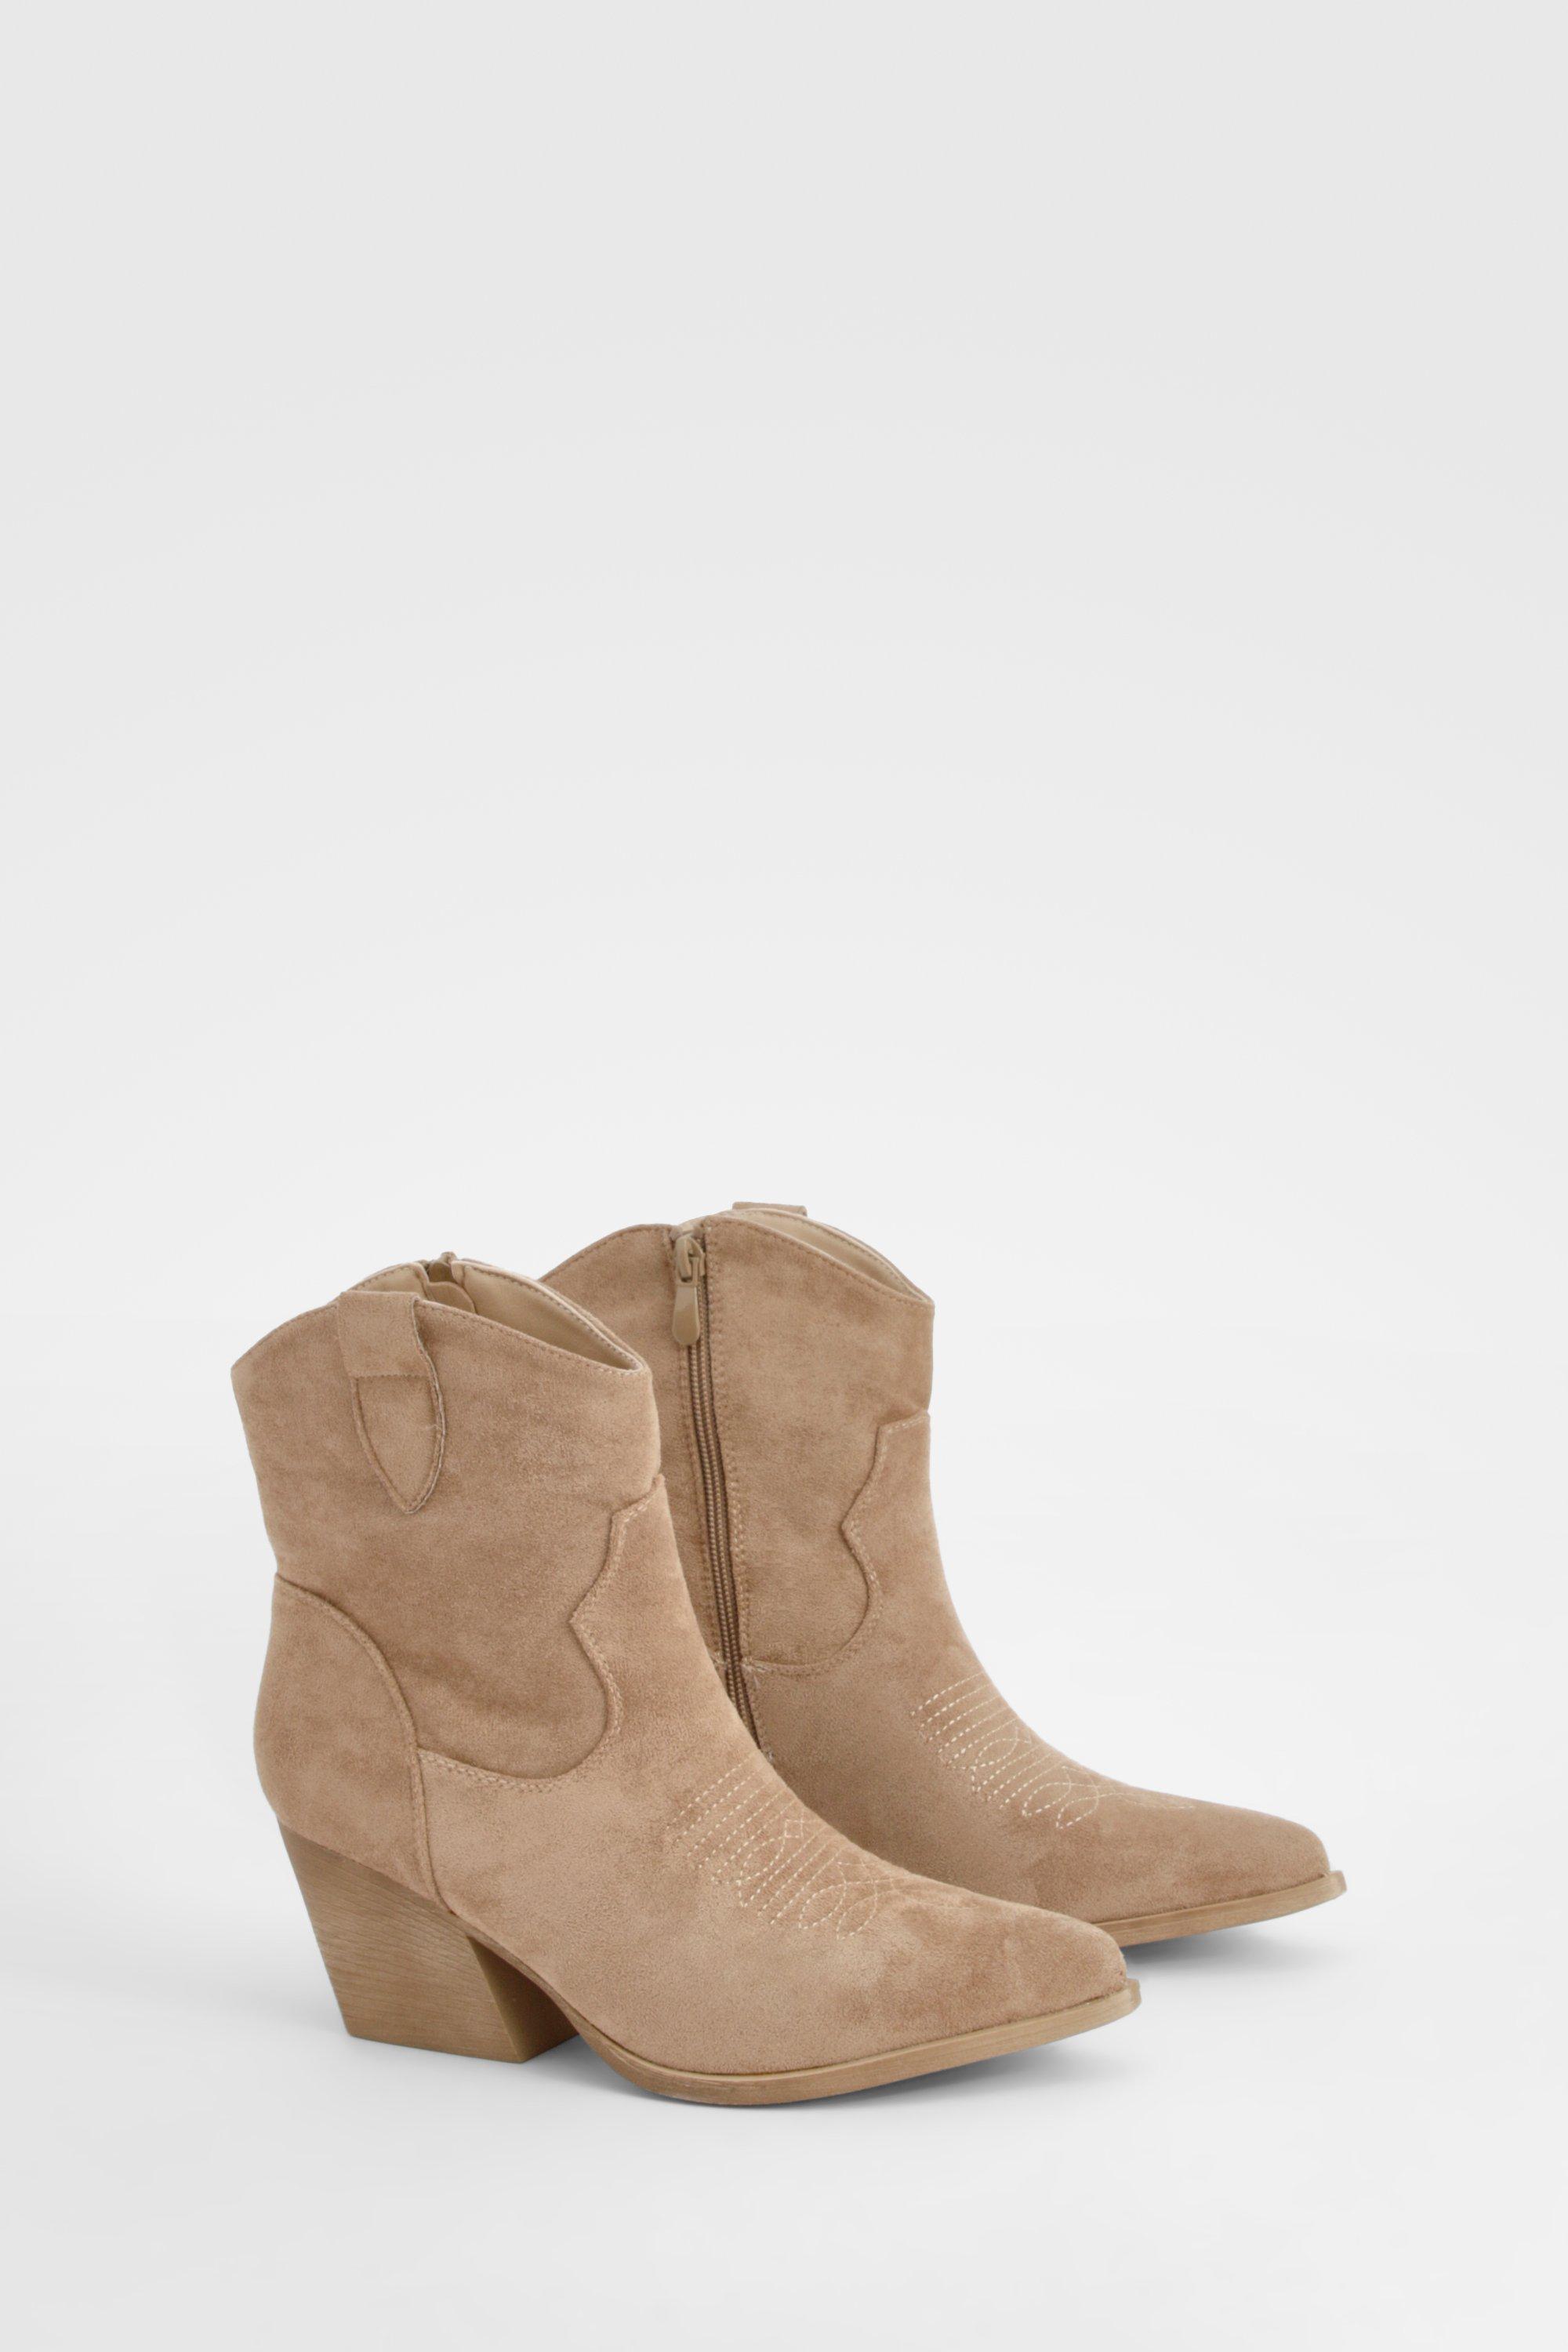 Boohoo Ankle High Western Cowboy Boots, Taupe